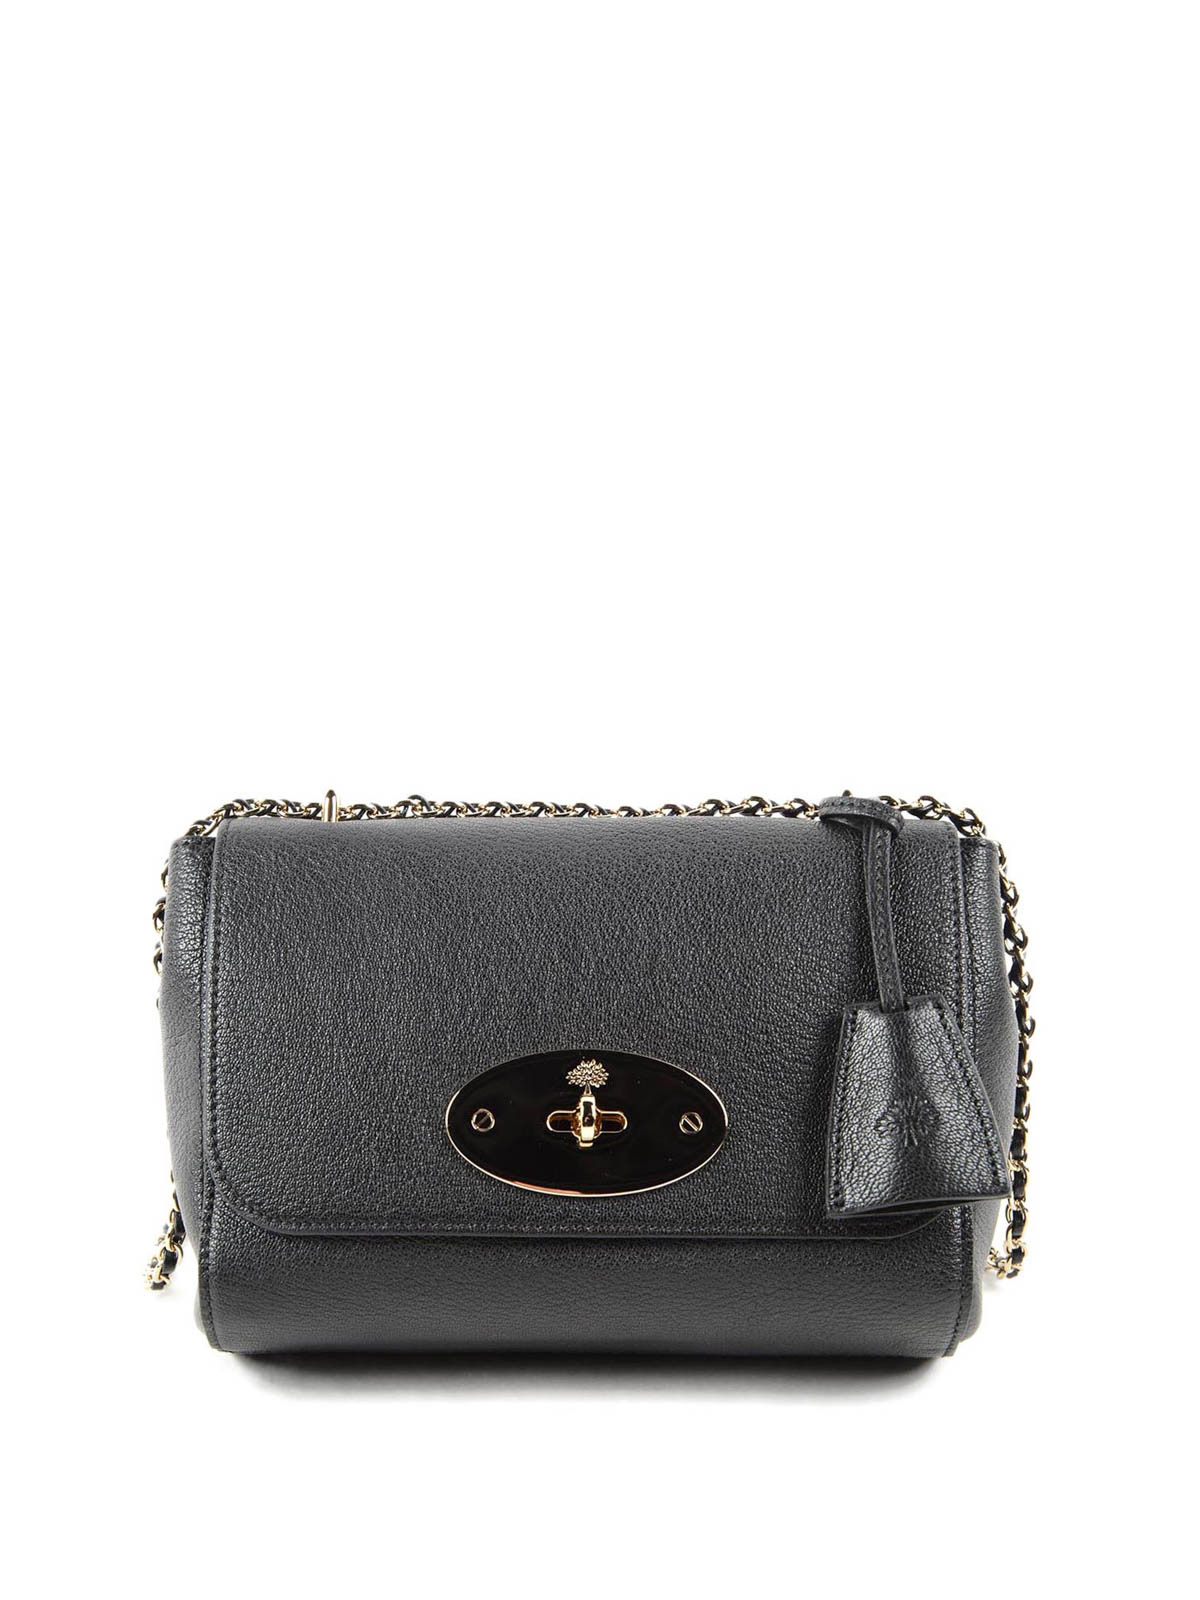 Mulberry Lily Leather Crossbody Bag In Black